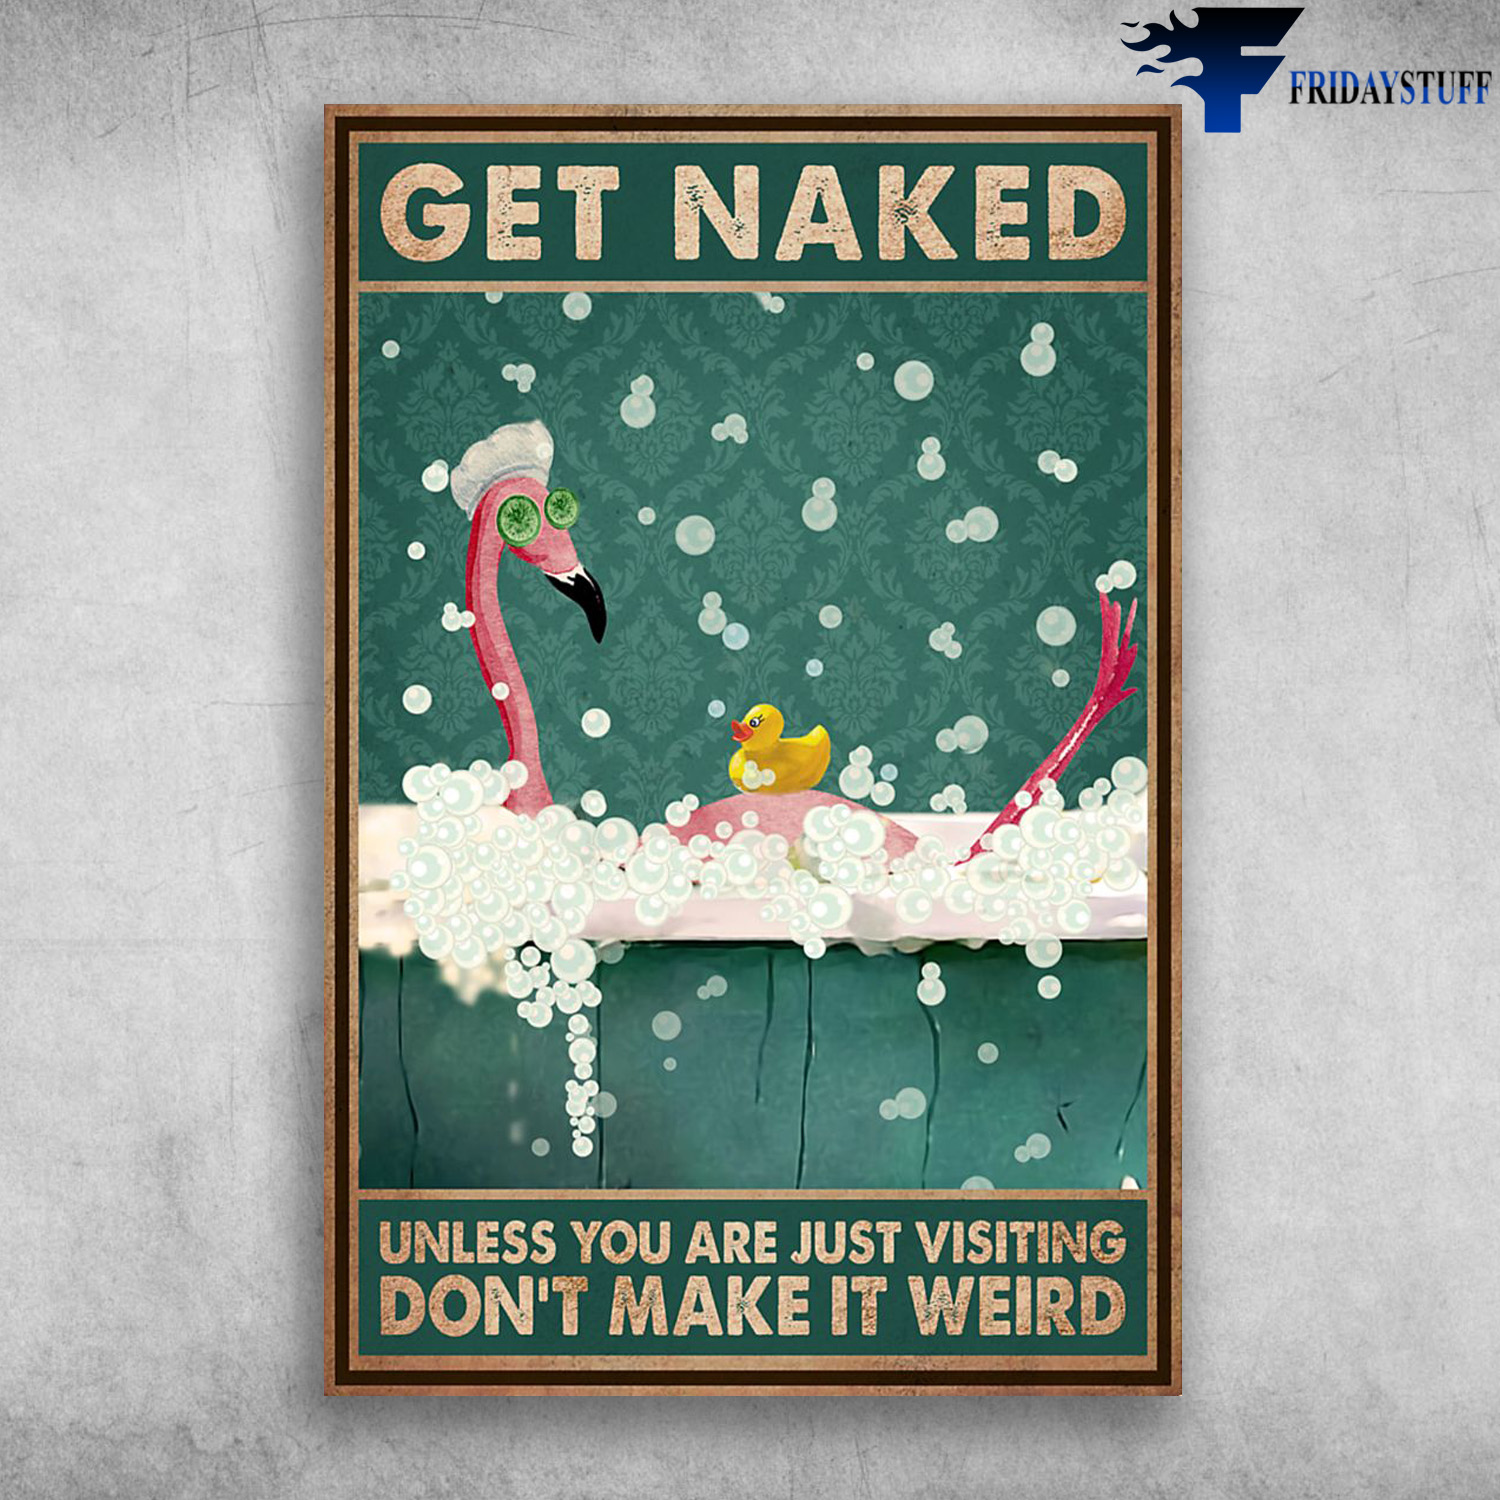 Flamingo Bird In Bathtub - Get Naked, Unless You Are Just Visiting, Don't Make It Weird